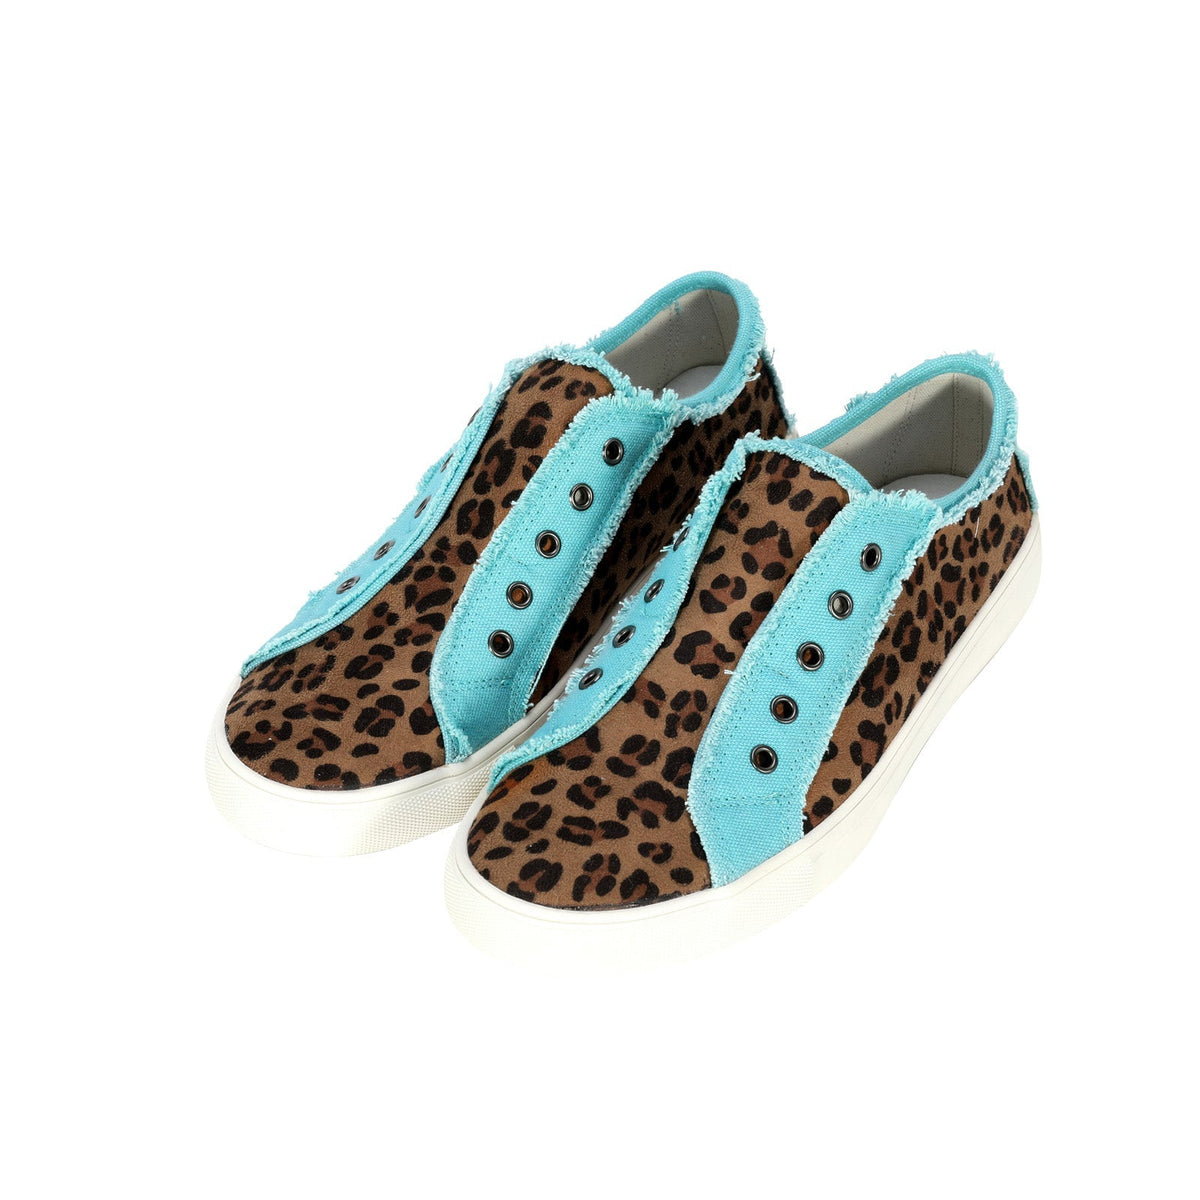 Montana West Leopard Hair-On Canvas Shoes - Cowgirl Wear